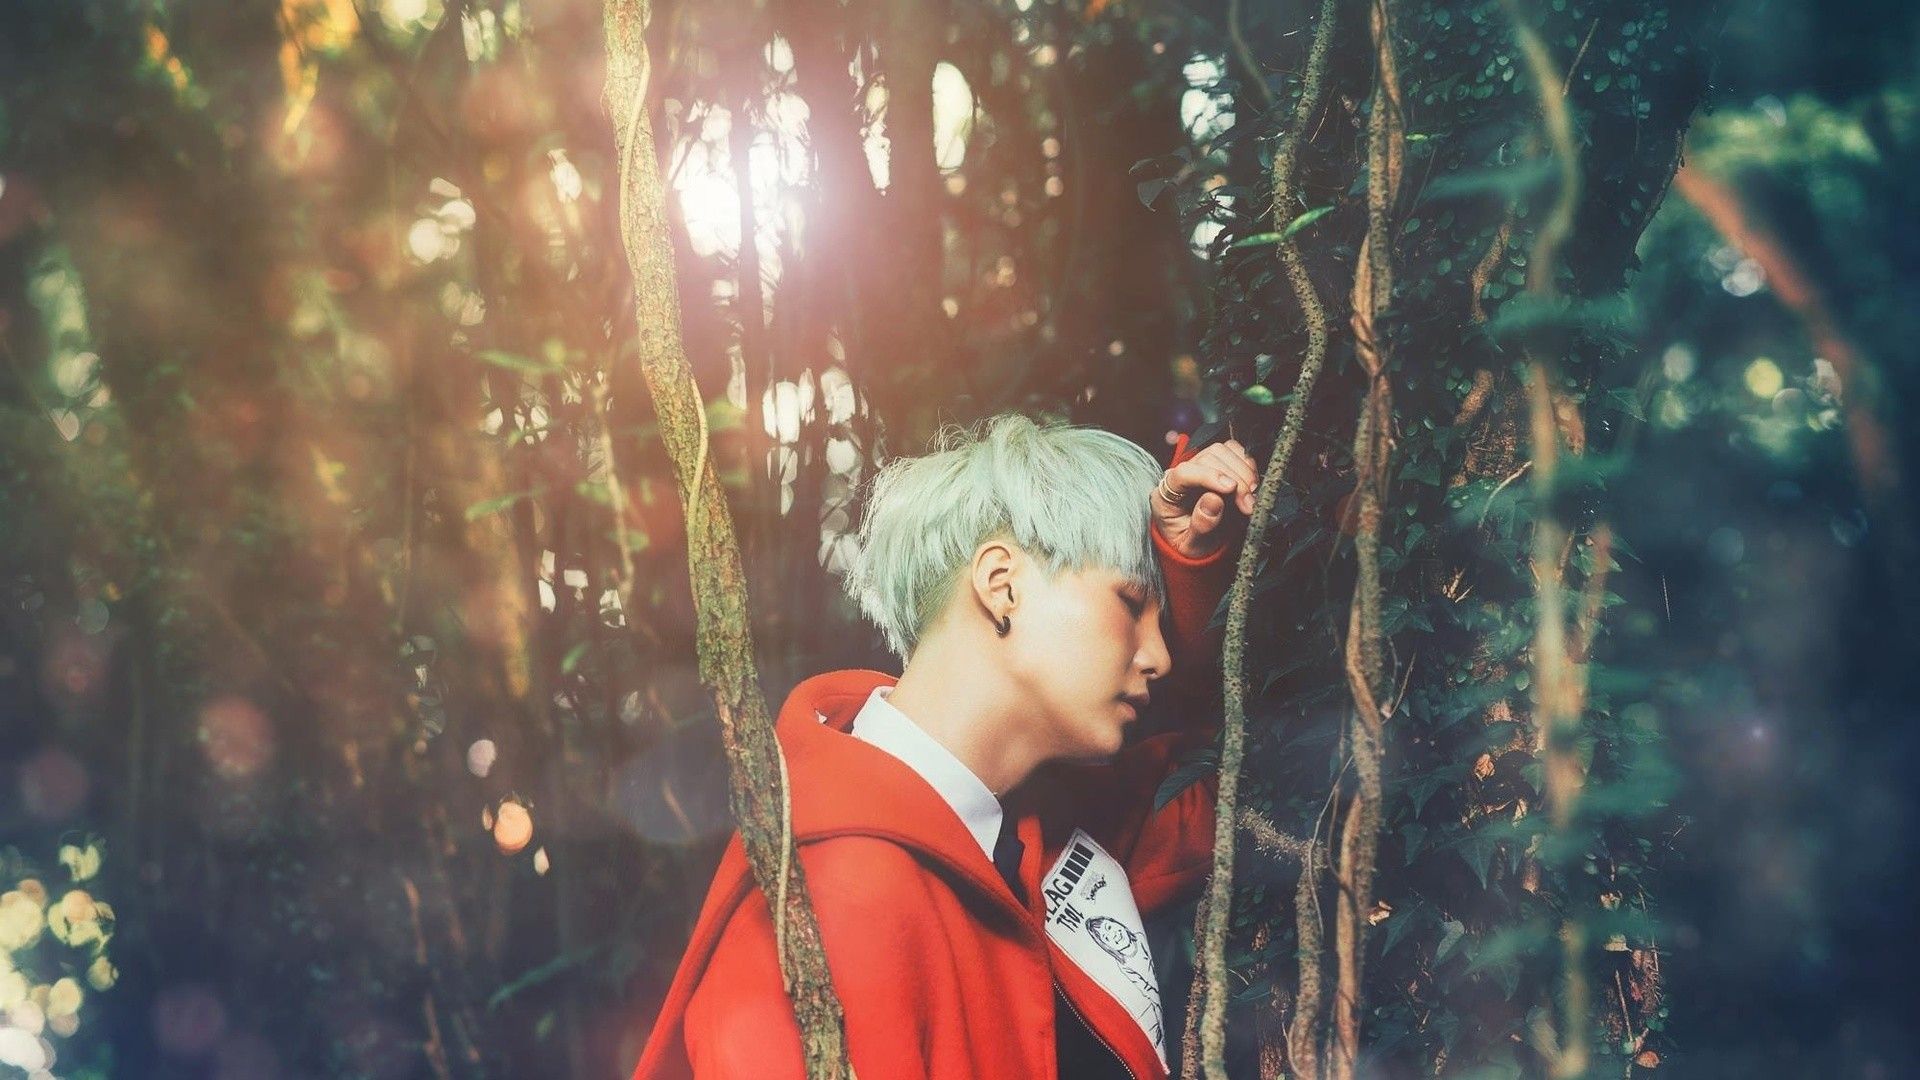 A person with green hair standing in a forest. - Suga